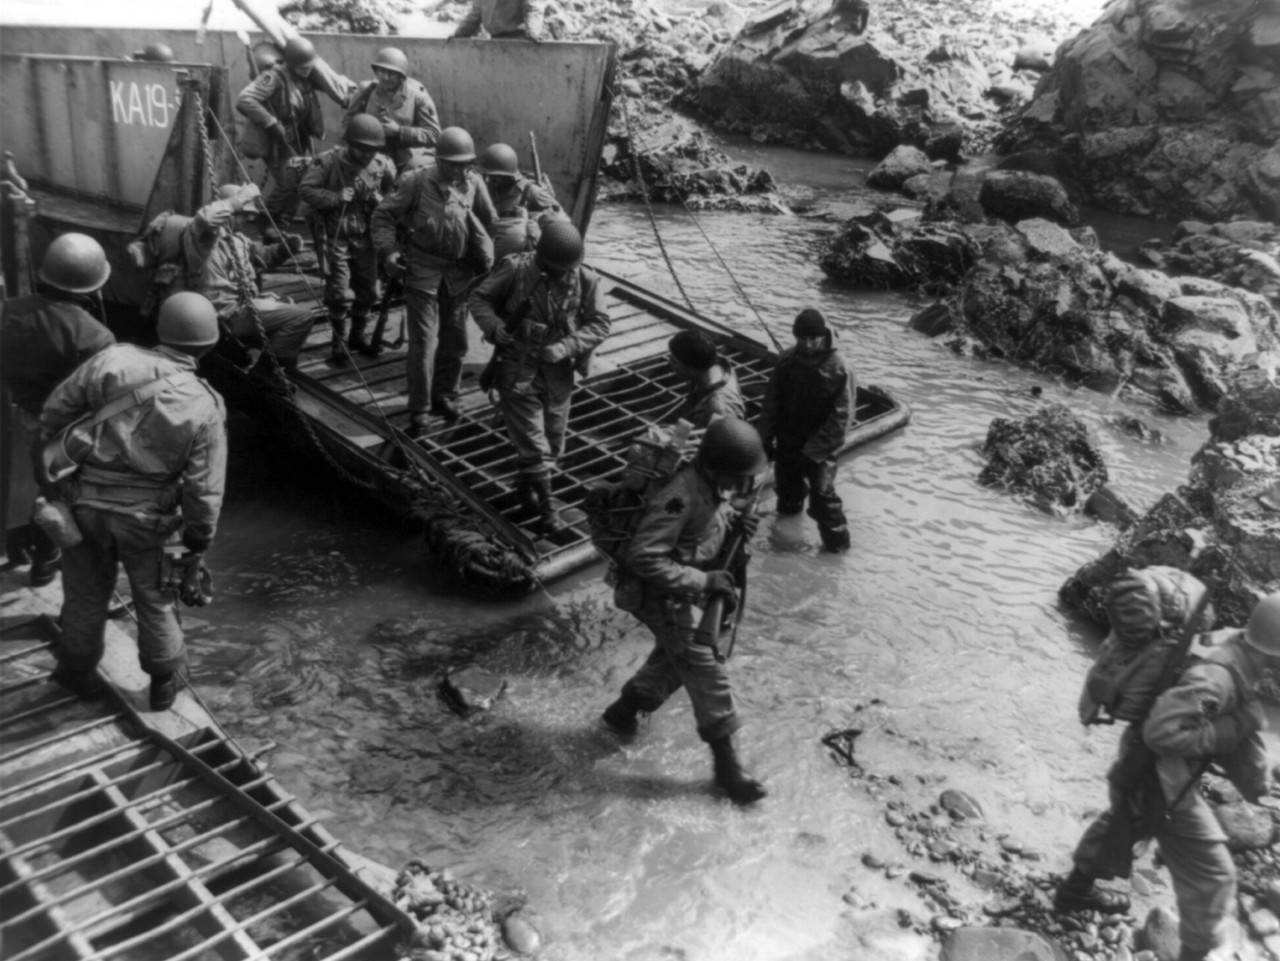 LC-USZ62-98197:  Aleutian Islands Campaign, Kiska Landing, August 15, 1943.   Allied Invasion of Kiska, August 15-24, 1943.    Soldiers getting off their landing craft from USS Thuban (AKA-19) onto the rocky shores of Kiska Island, Alaska, on invasion day, assisted by U.S. Navy Seabees.  Courtesy of the Library of Congress.  (2015/8/7).